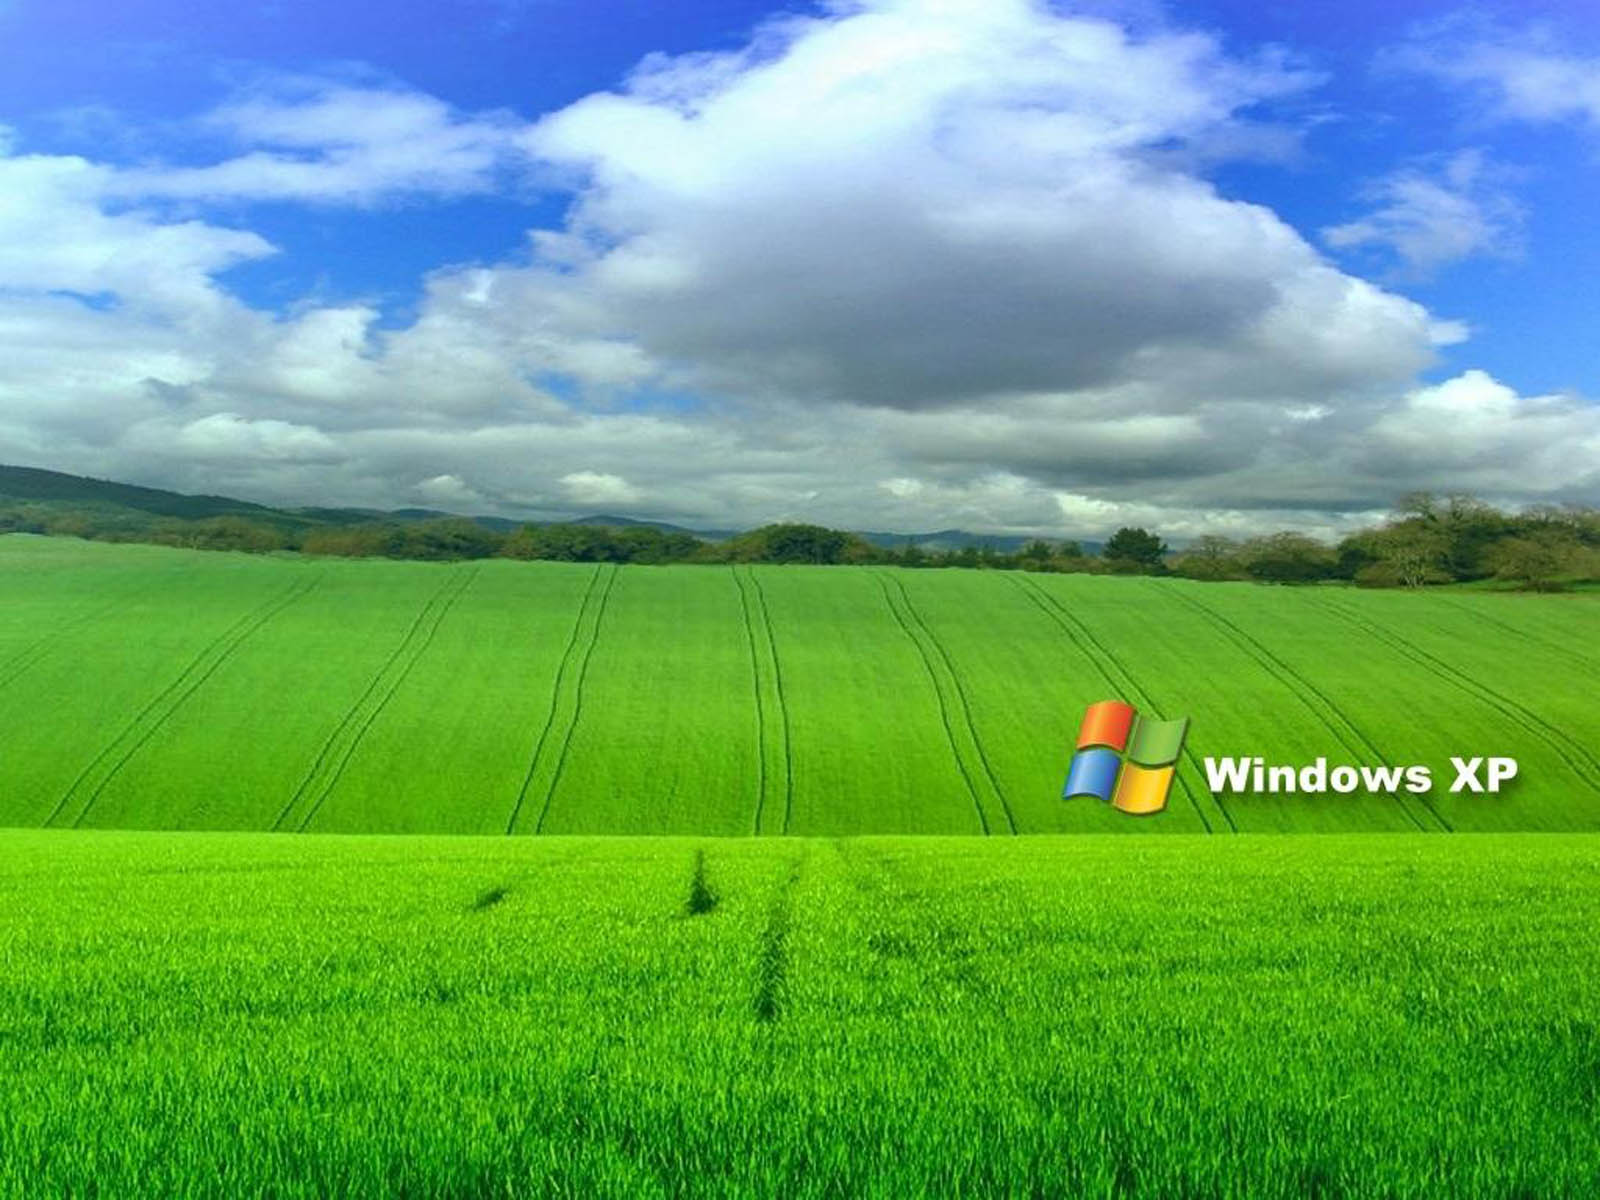 Xp Desktop Wallpaper Image Photos Pictures And Background For